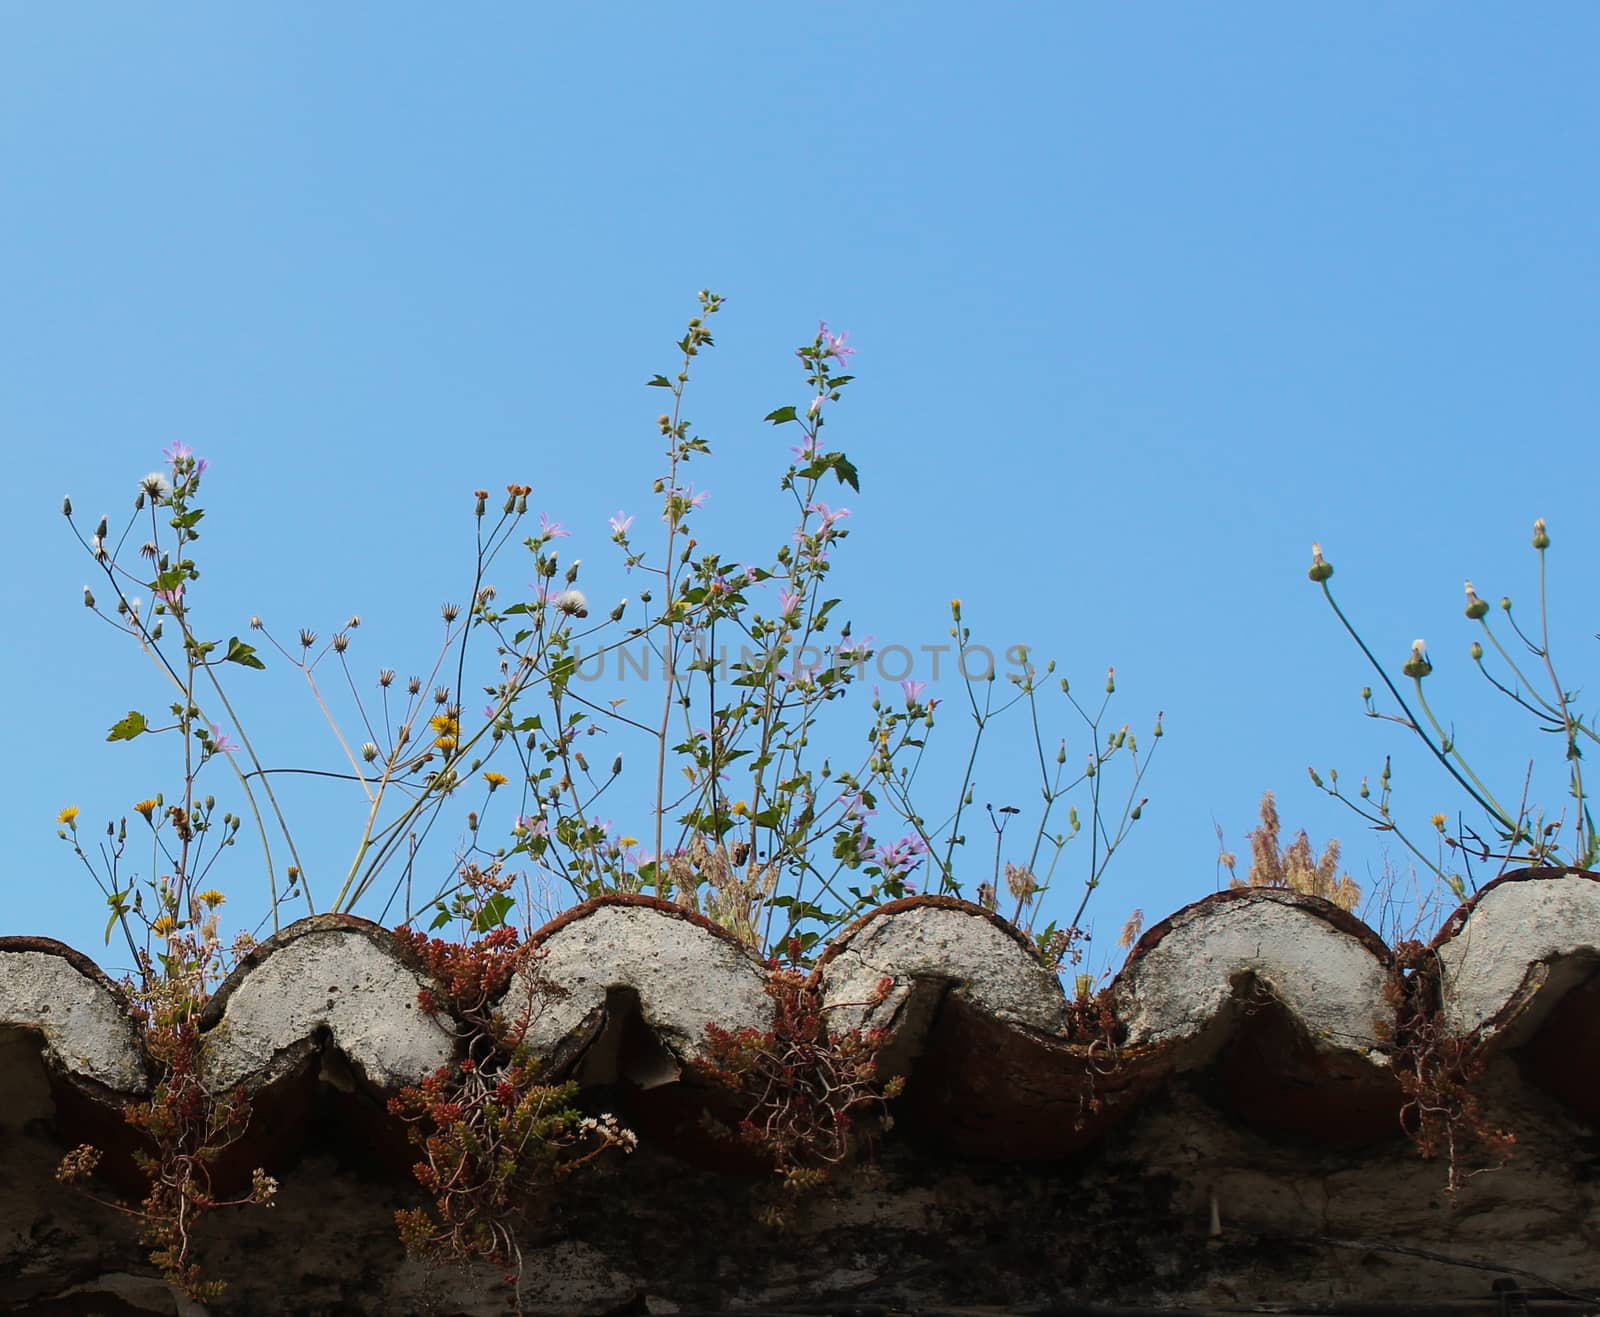 Plants growing on a house roof. Beja, Portugal.